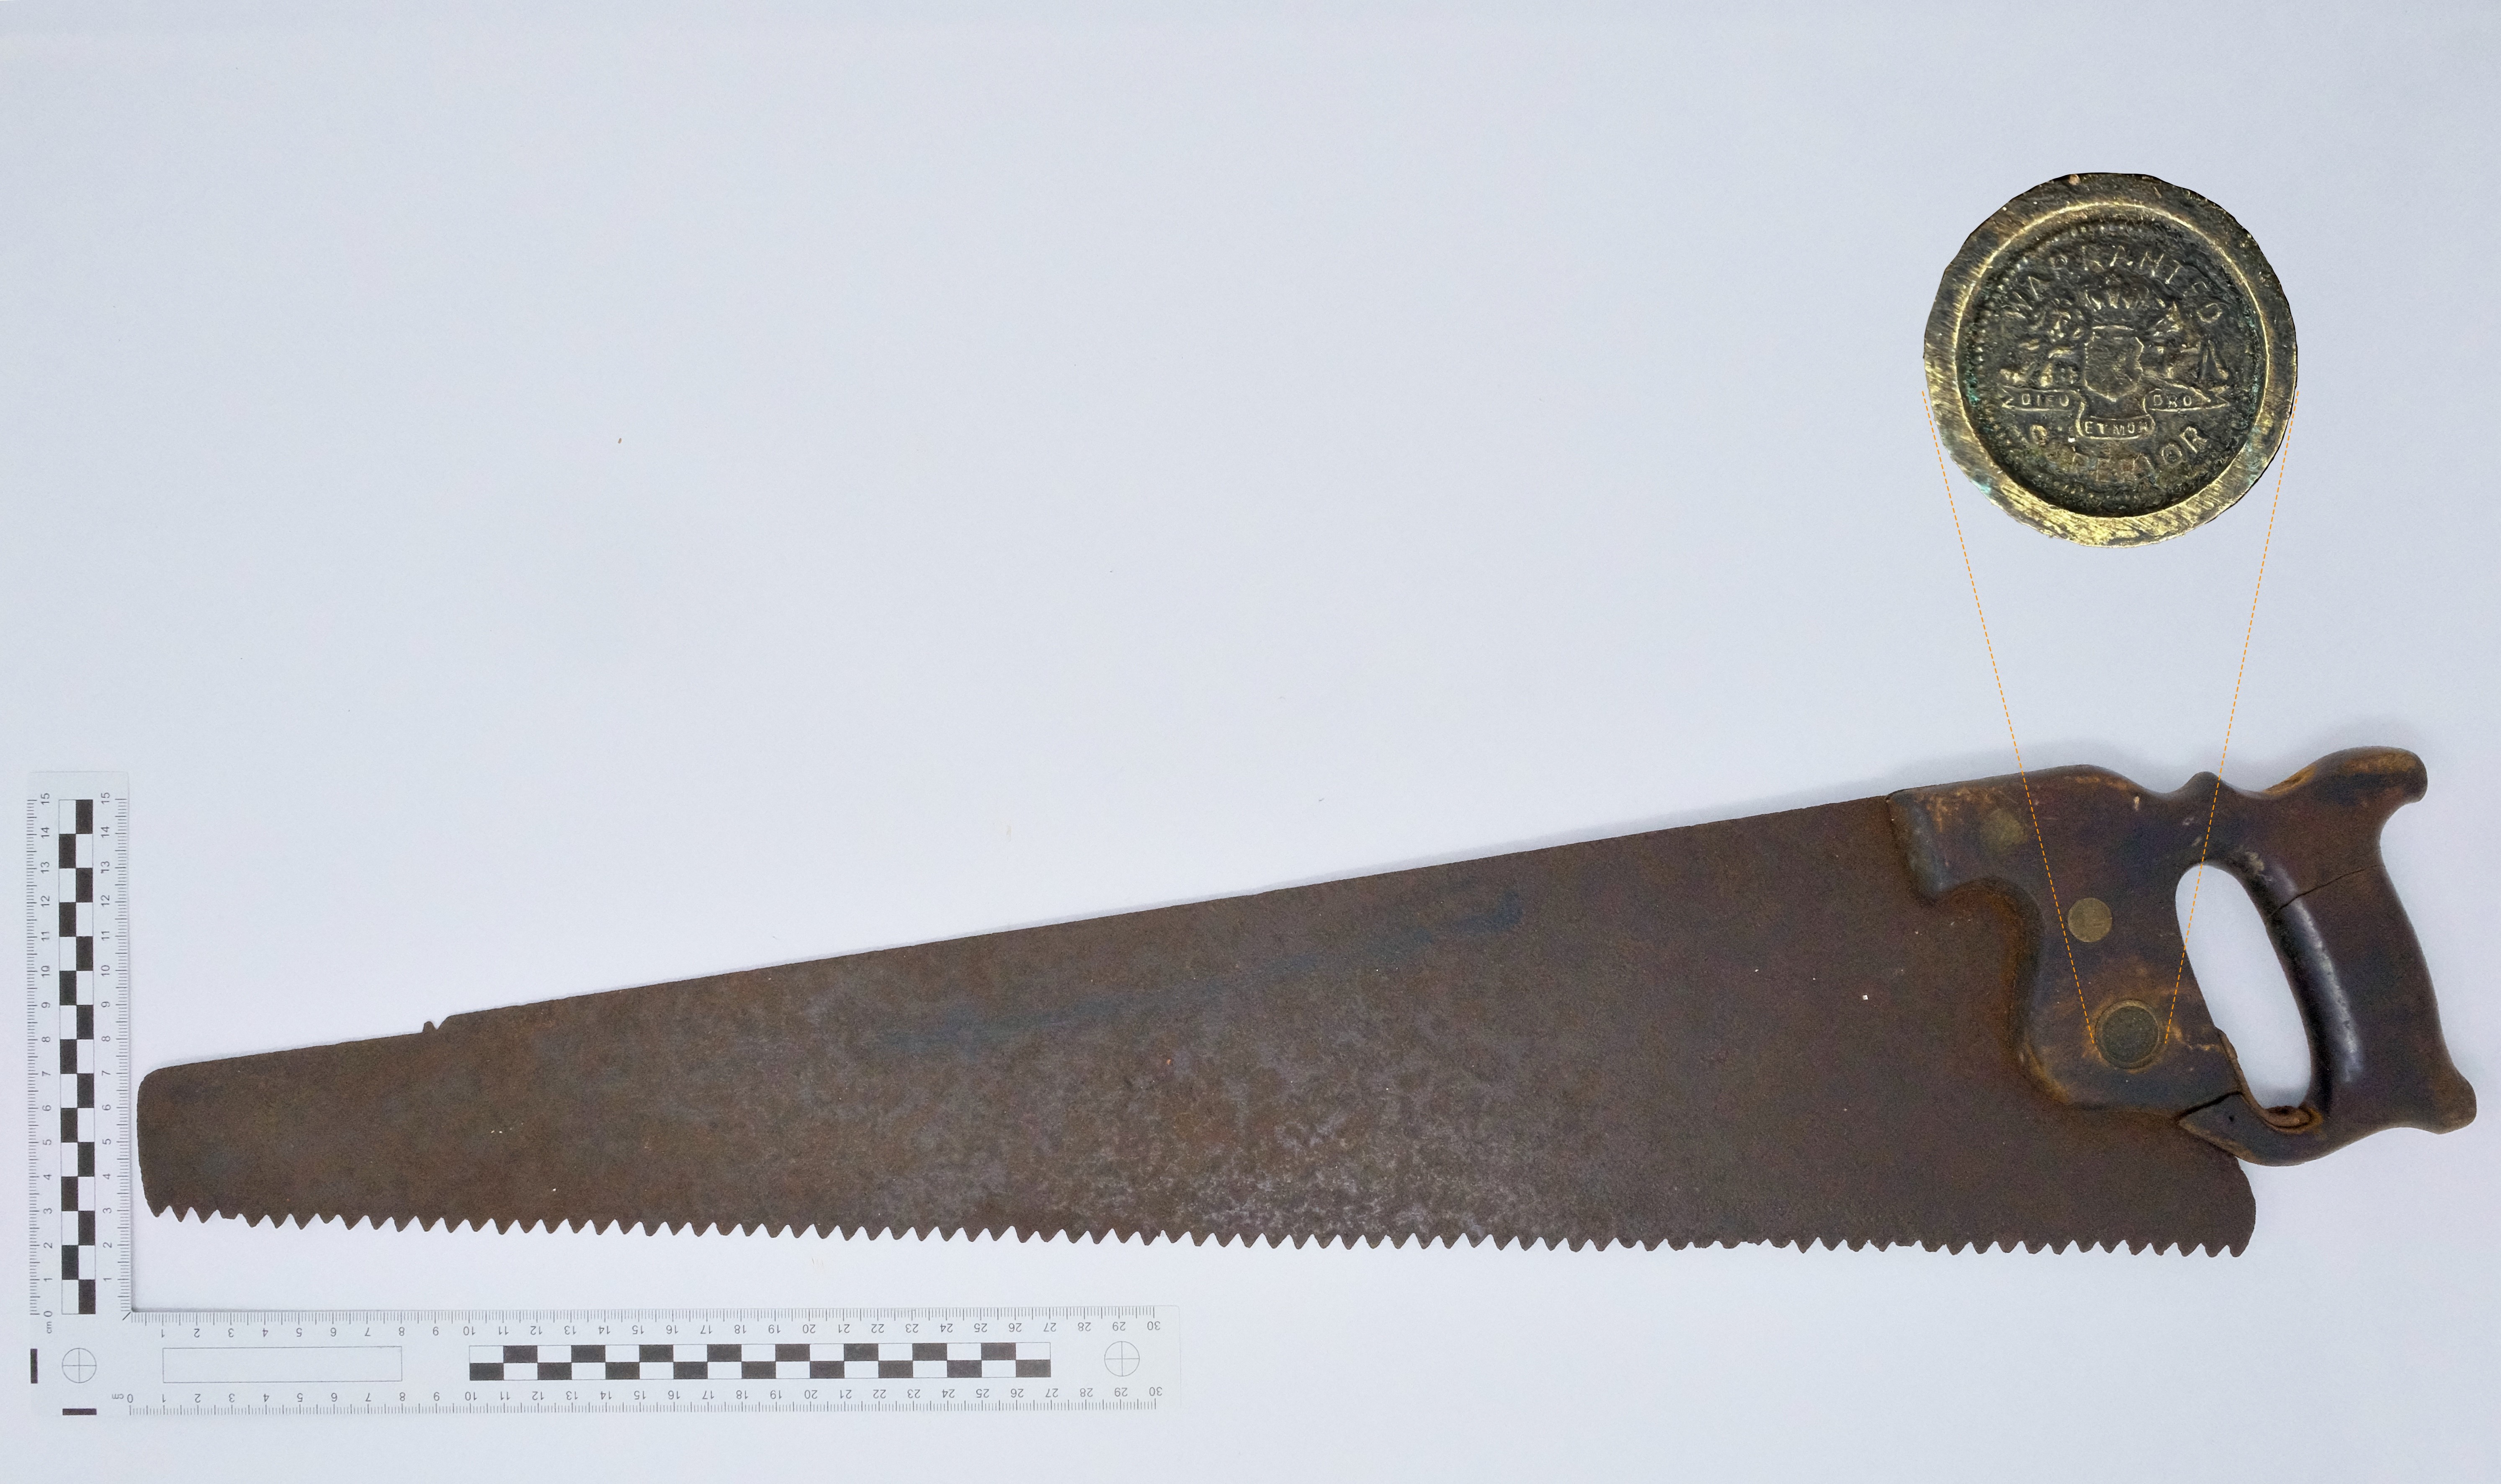 Photo of a rusty wood saw with a wooden handle, blade pointing towards the left, on a white background with a black and white scale bar on the lower left suggesting that the saw is 0.7m long. The photo contains an inset image to enlarge the circular maker’s mark ‘Warrented Superior’. 